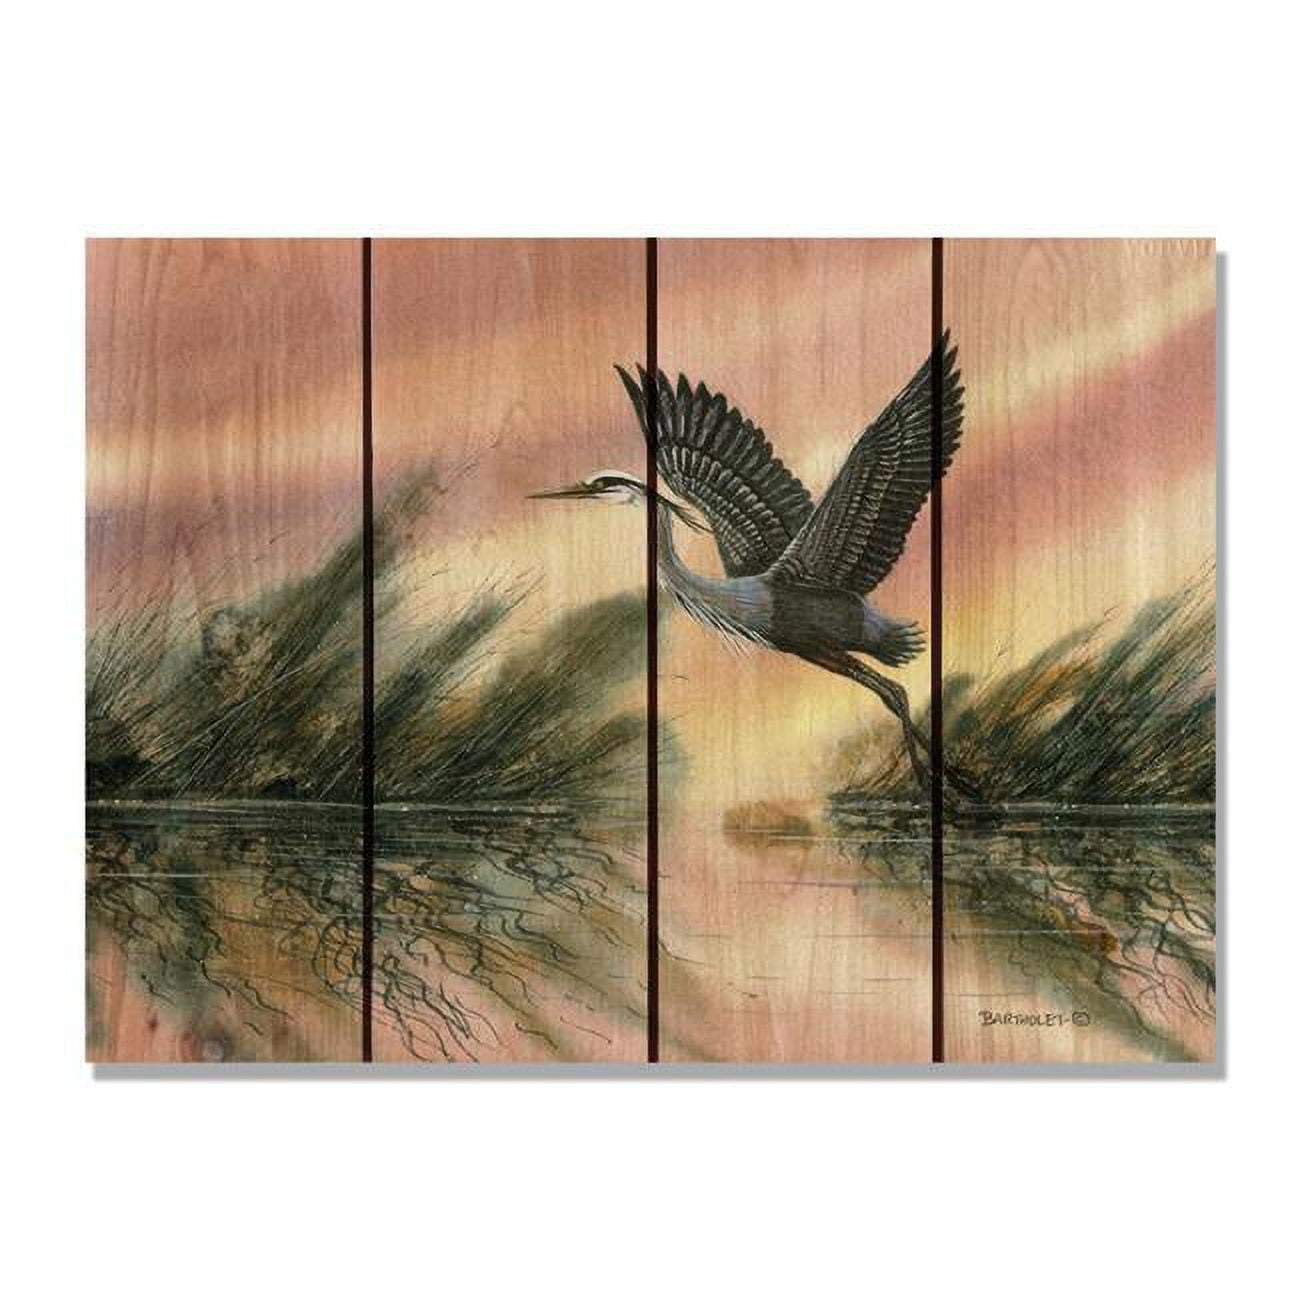 Day Dream Hq Dbcm2216 22 X 16 In. Bartholets Cool Of The Morning Inside & Outside Cedar Wall Art